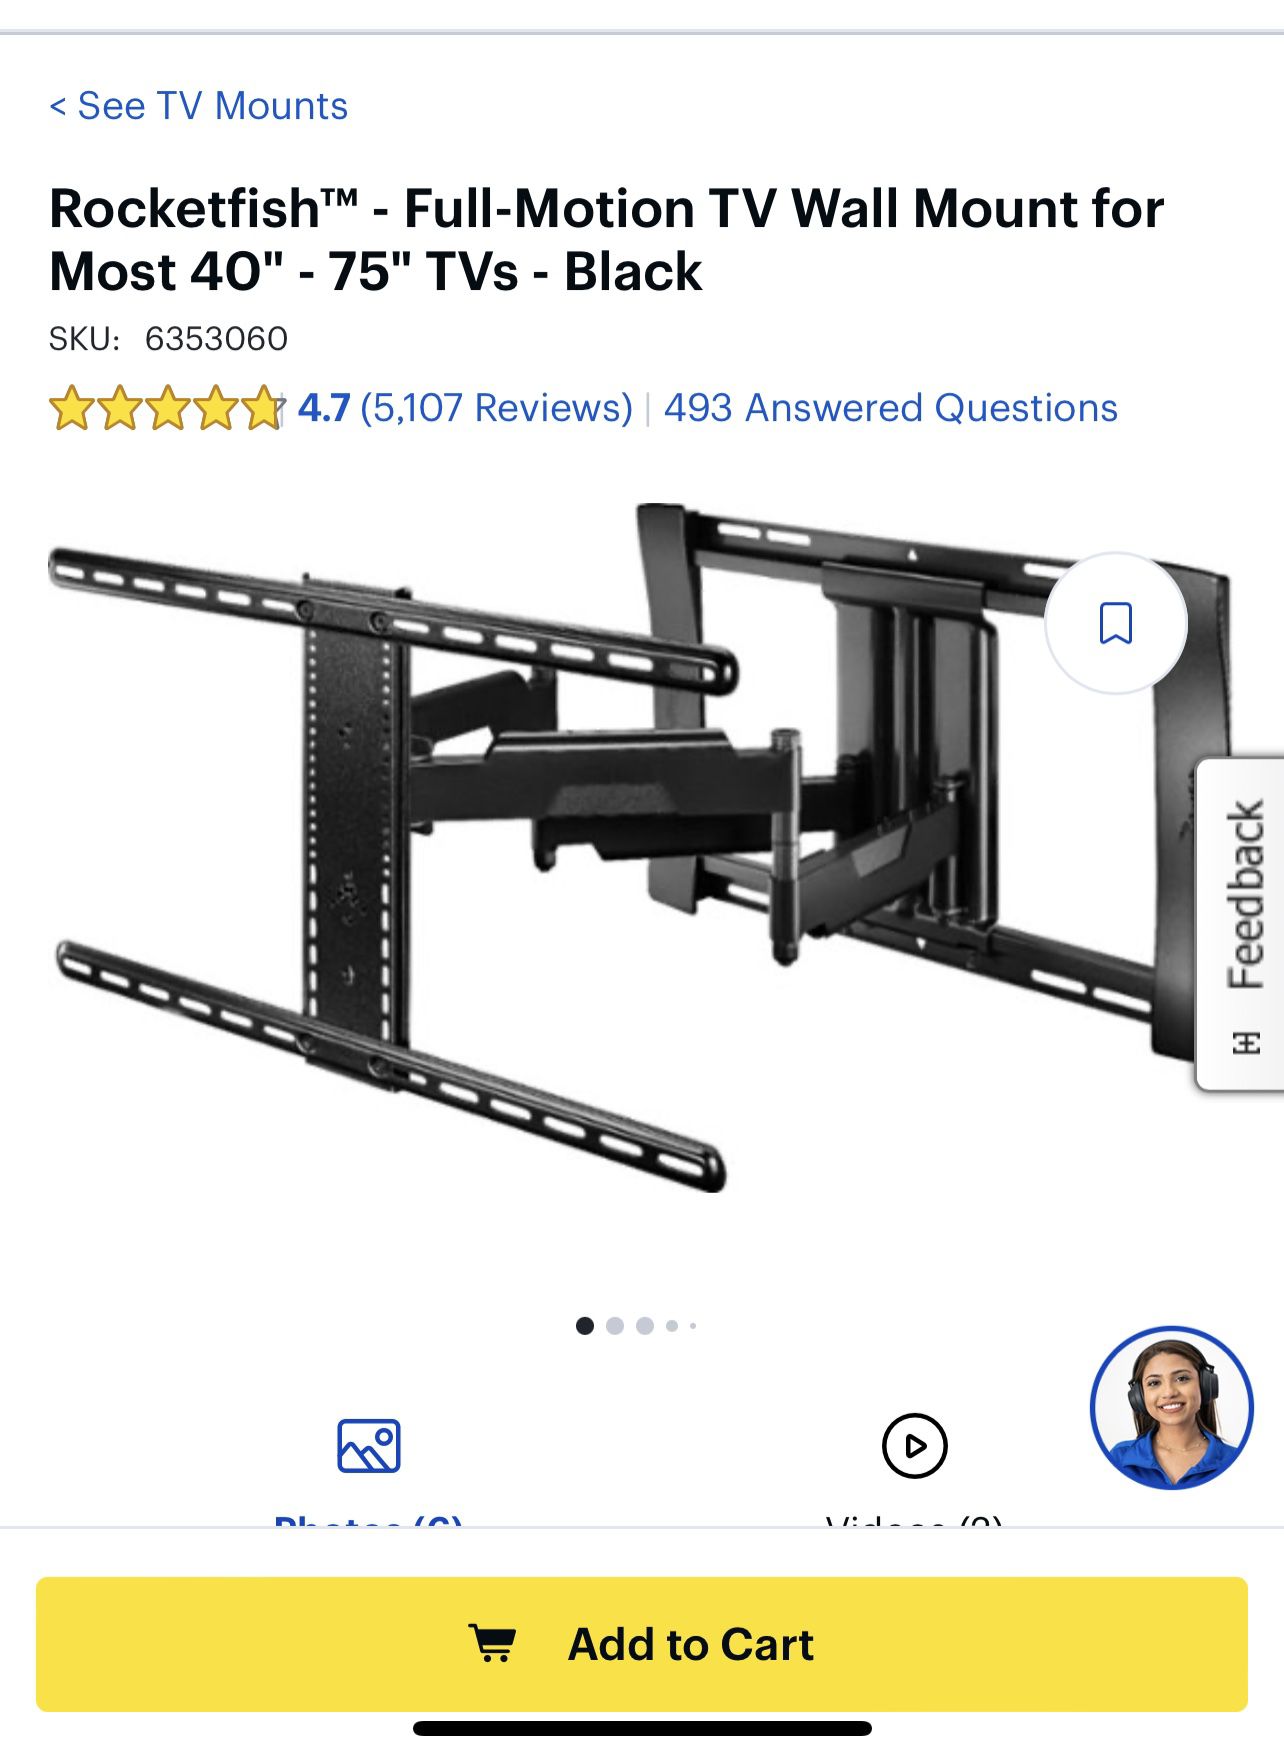 Brand New Rocketfish Full-Motion TV Wall Mount for Most 40" - 75" TVs - Black